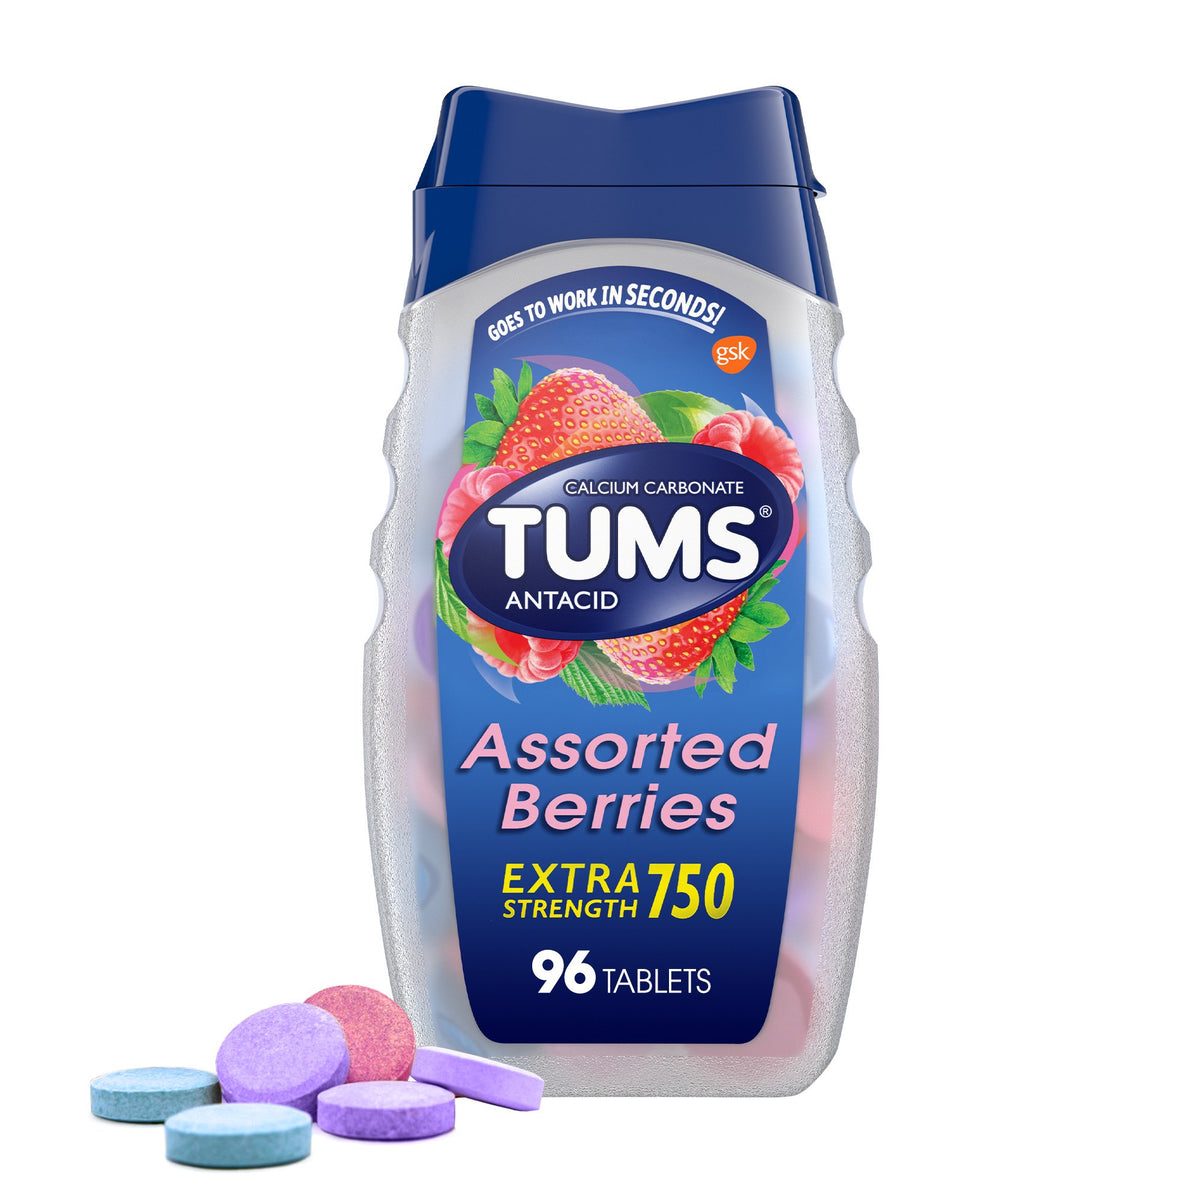 Tums Antacid Chewable Tablets Assorted Berries 96 each